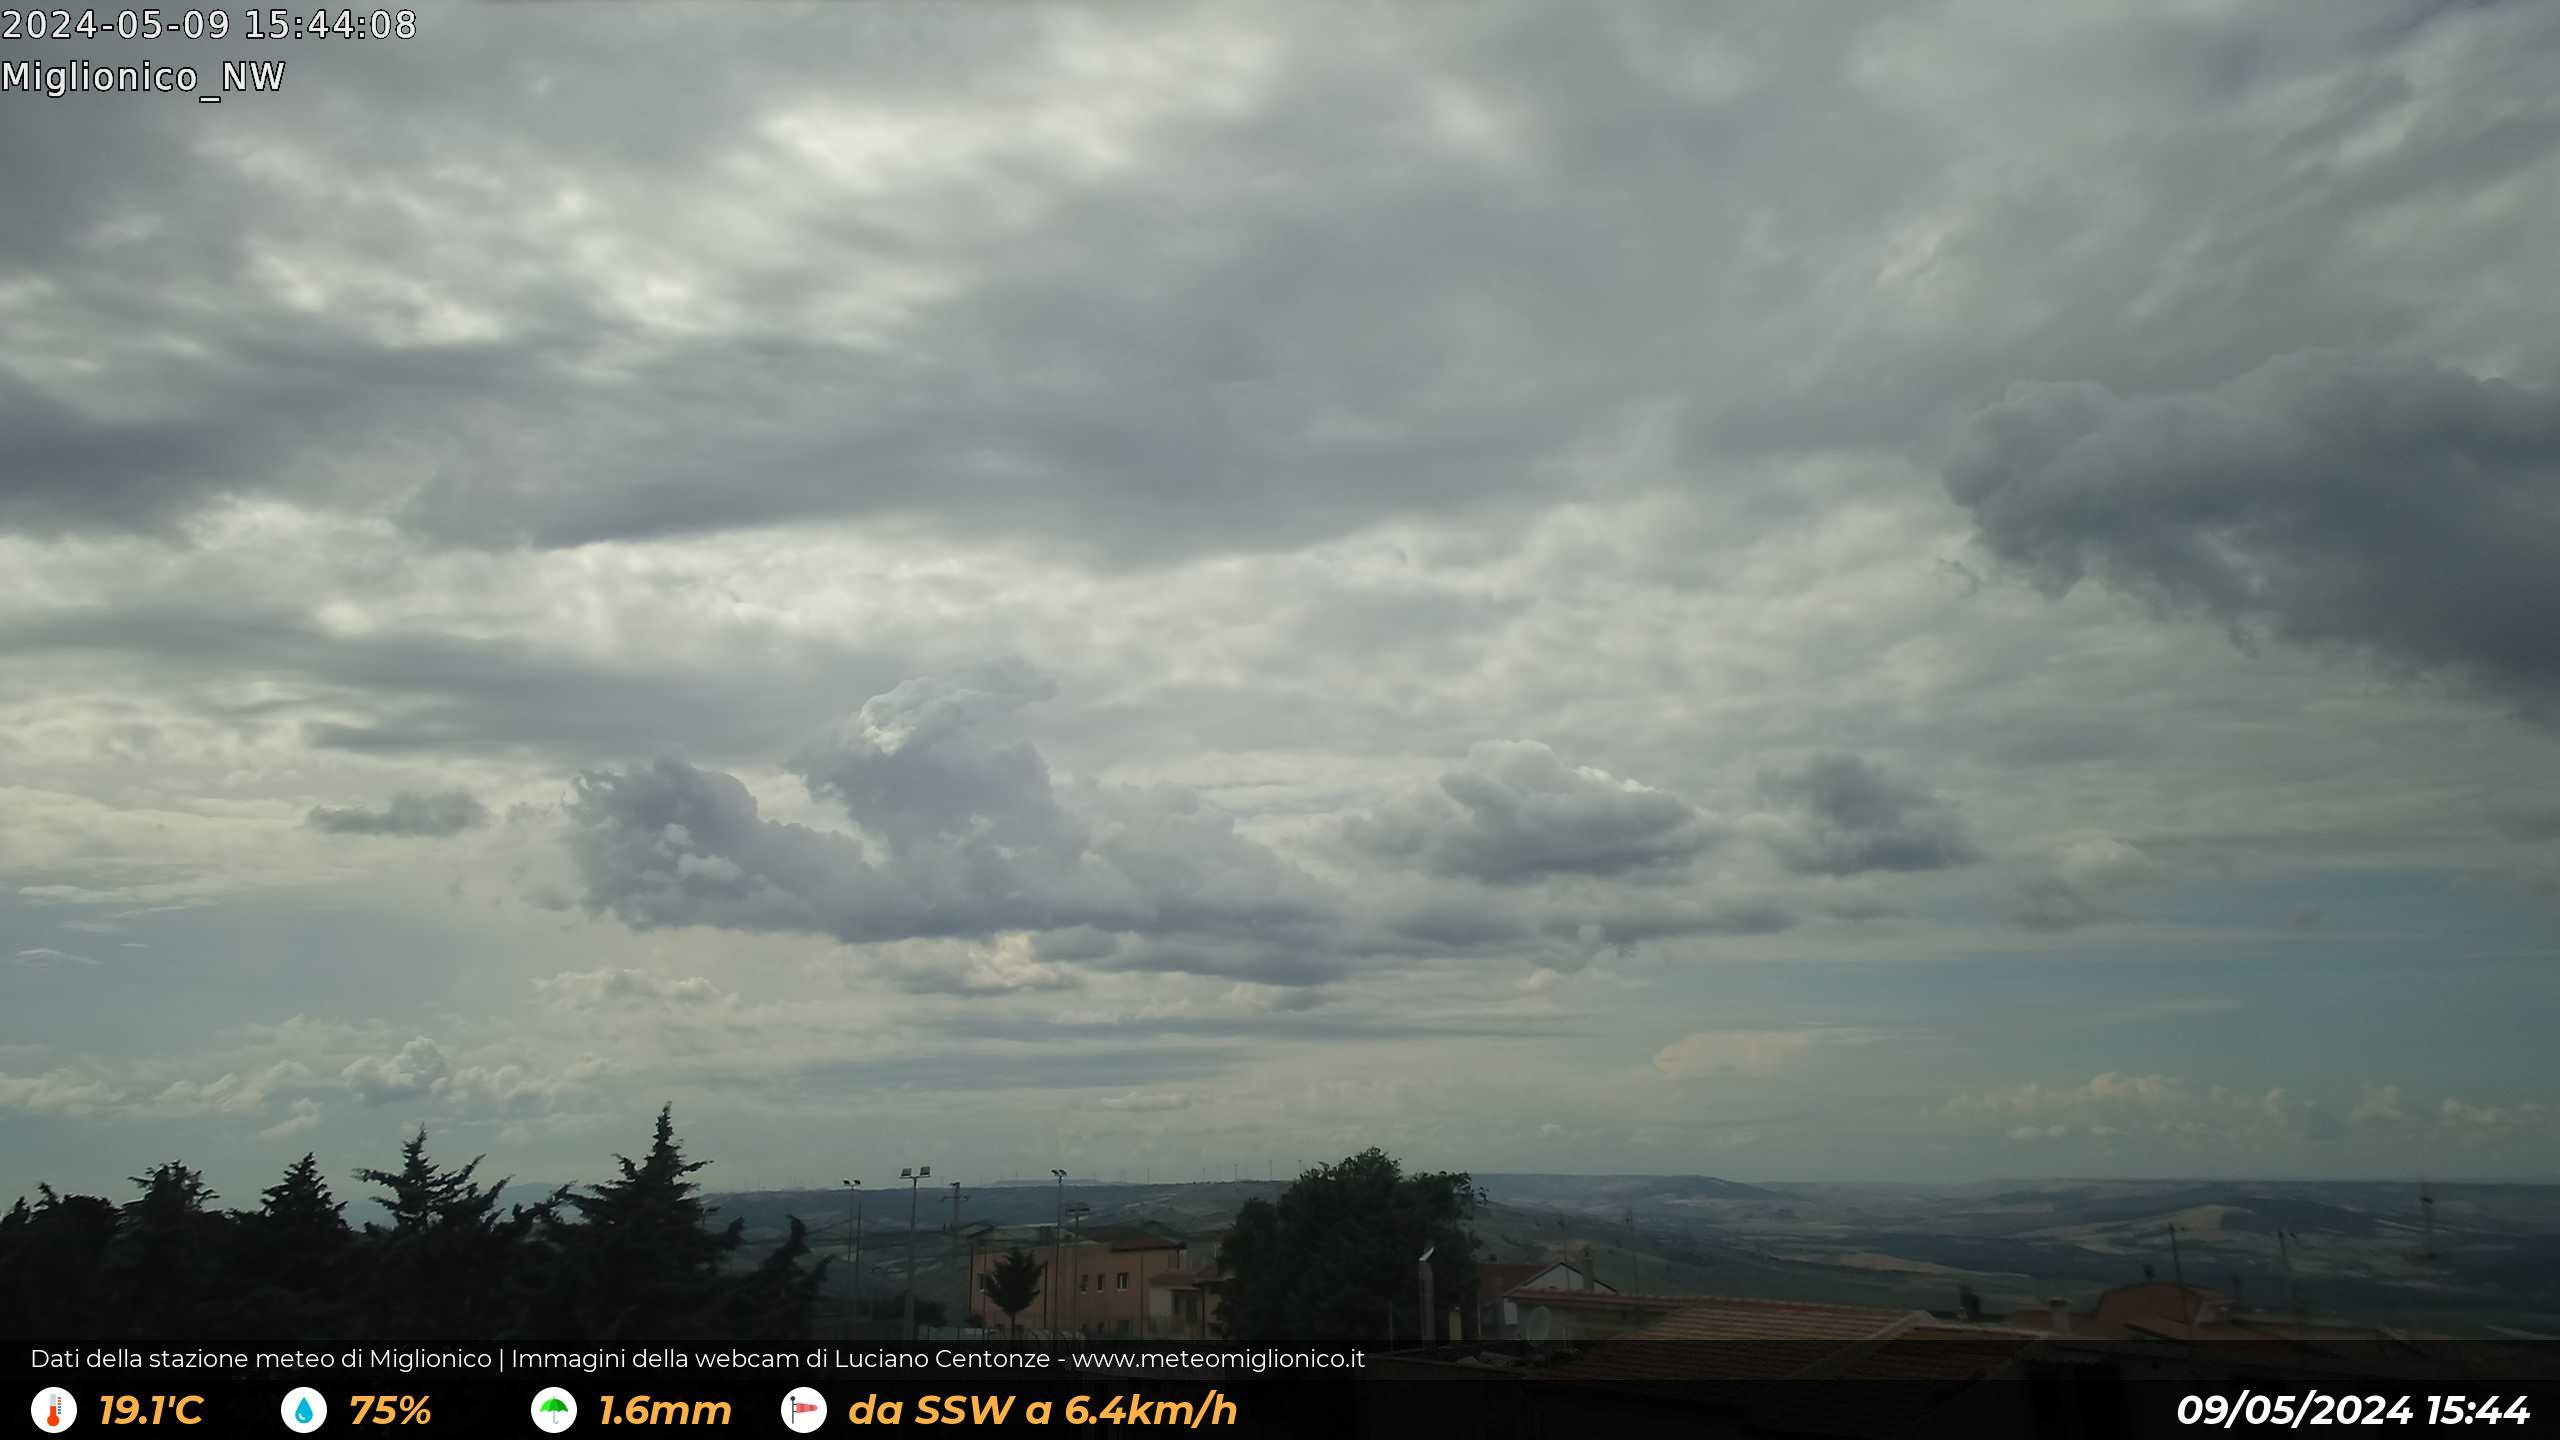 http://www.meteomiglionico.it/foscam3/FI9901EP_00626E93F8EE/snap/webcam.php